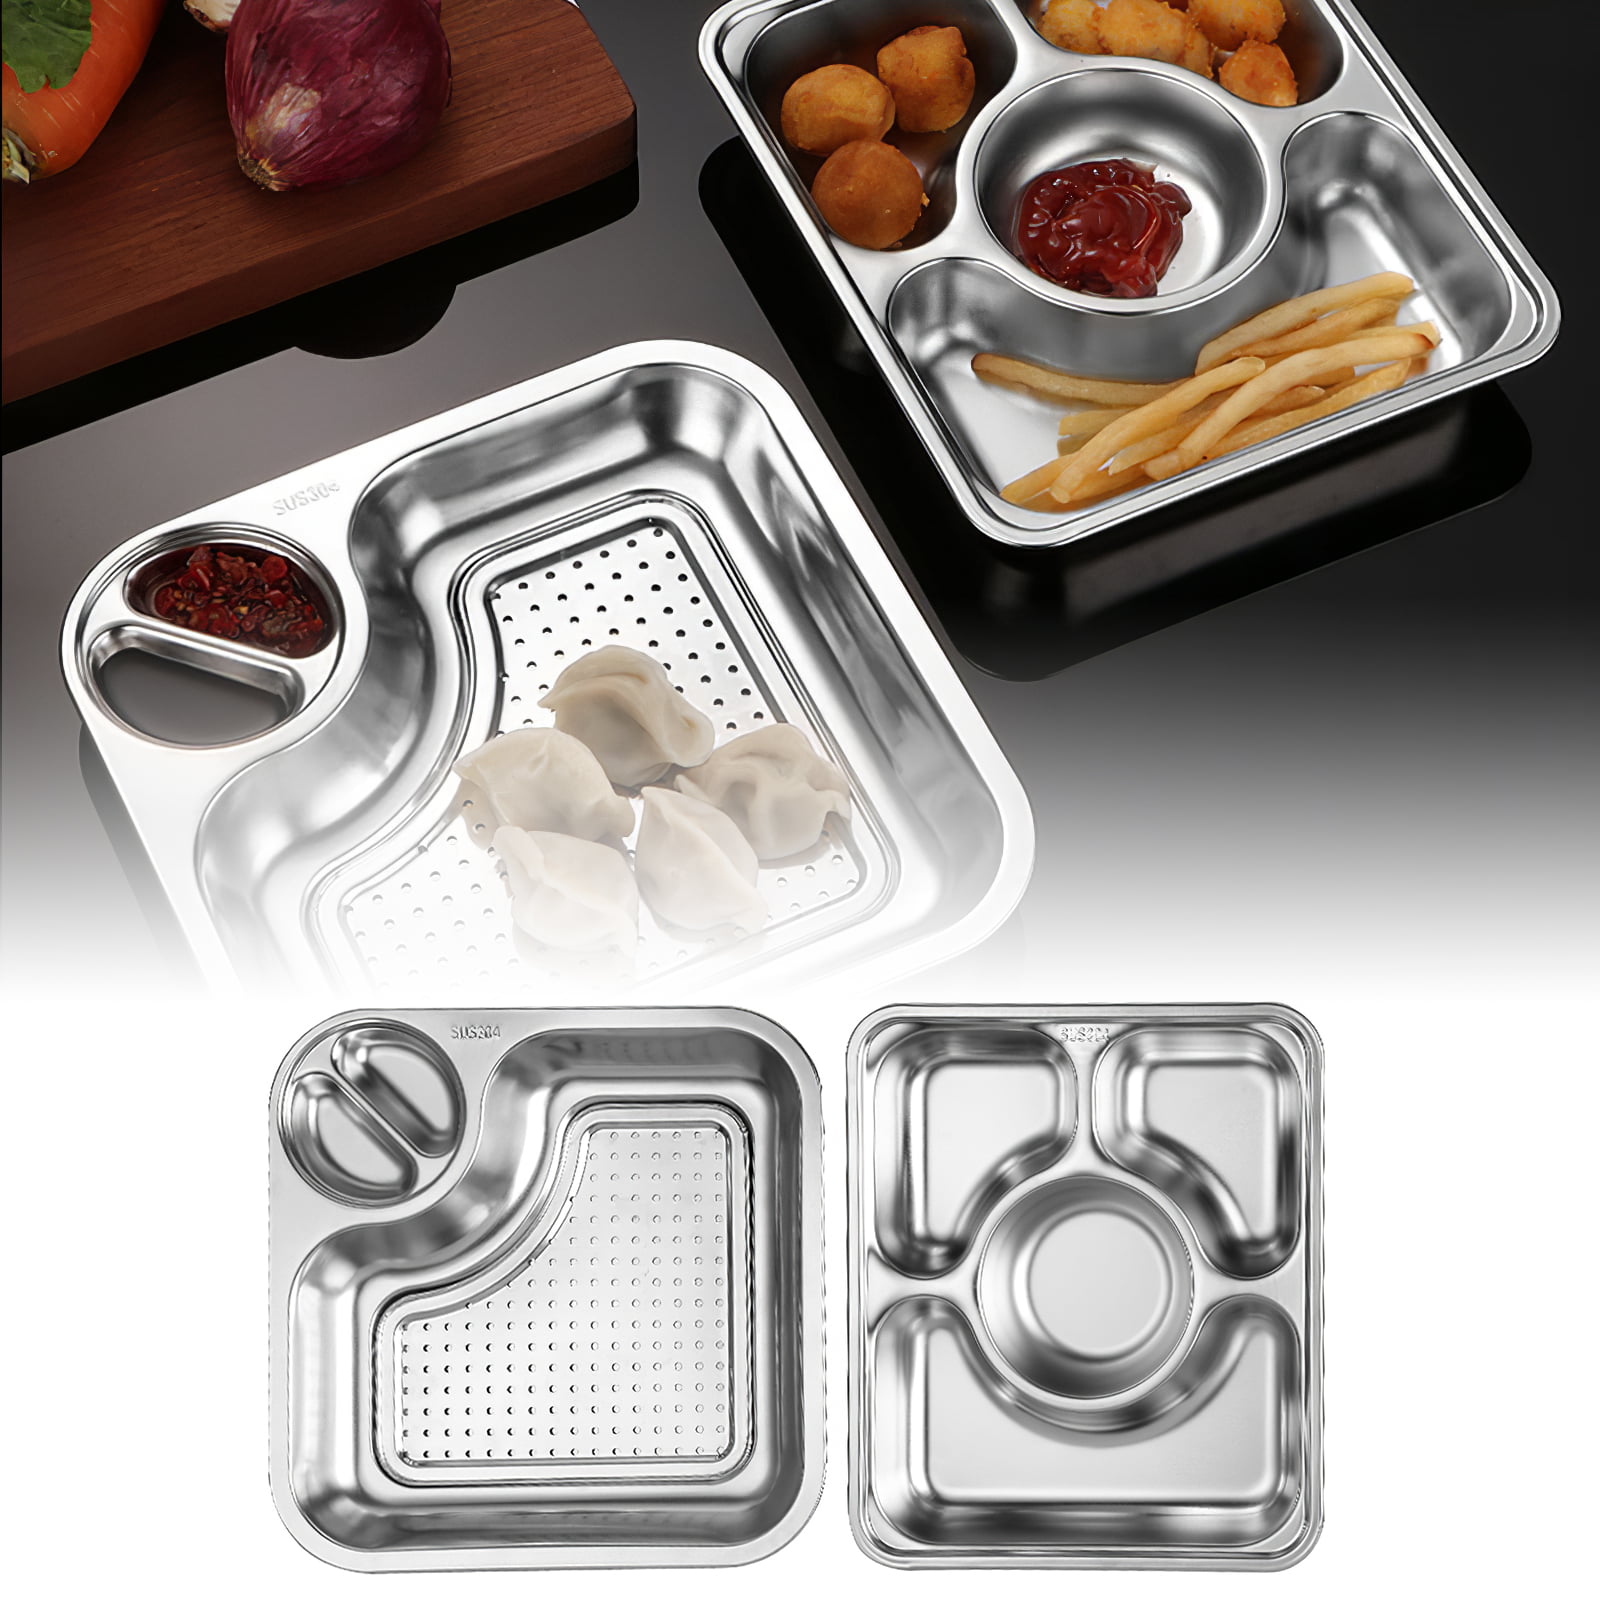 Camping WhopperIndia Heavy Duty Stainless Steel Rectangle/Square Deep Dinner Plate w/5 Sections Divided Mess Trays for Kids Lunch Events & Every Day Use 34 cm Each 